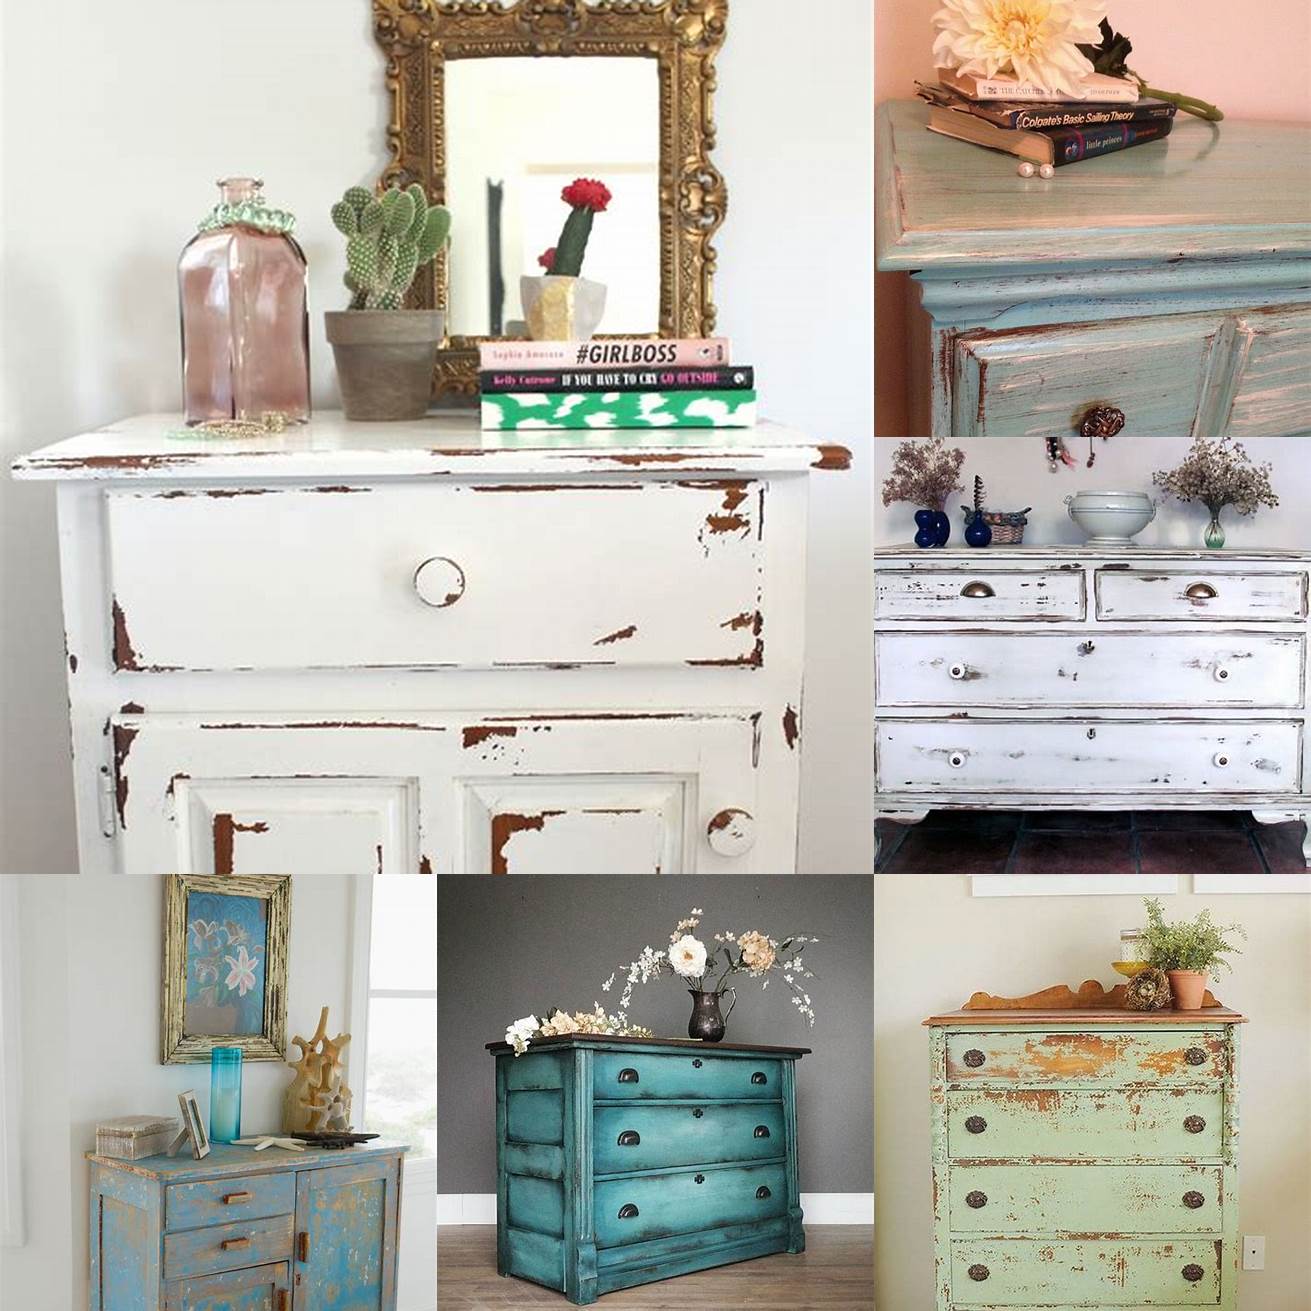 Distressing your furniture is a great way to add character and charm to your space